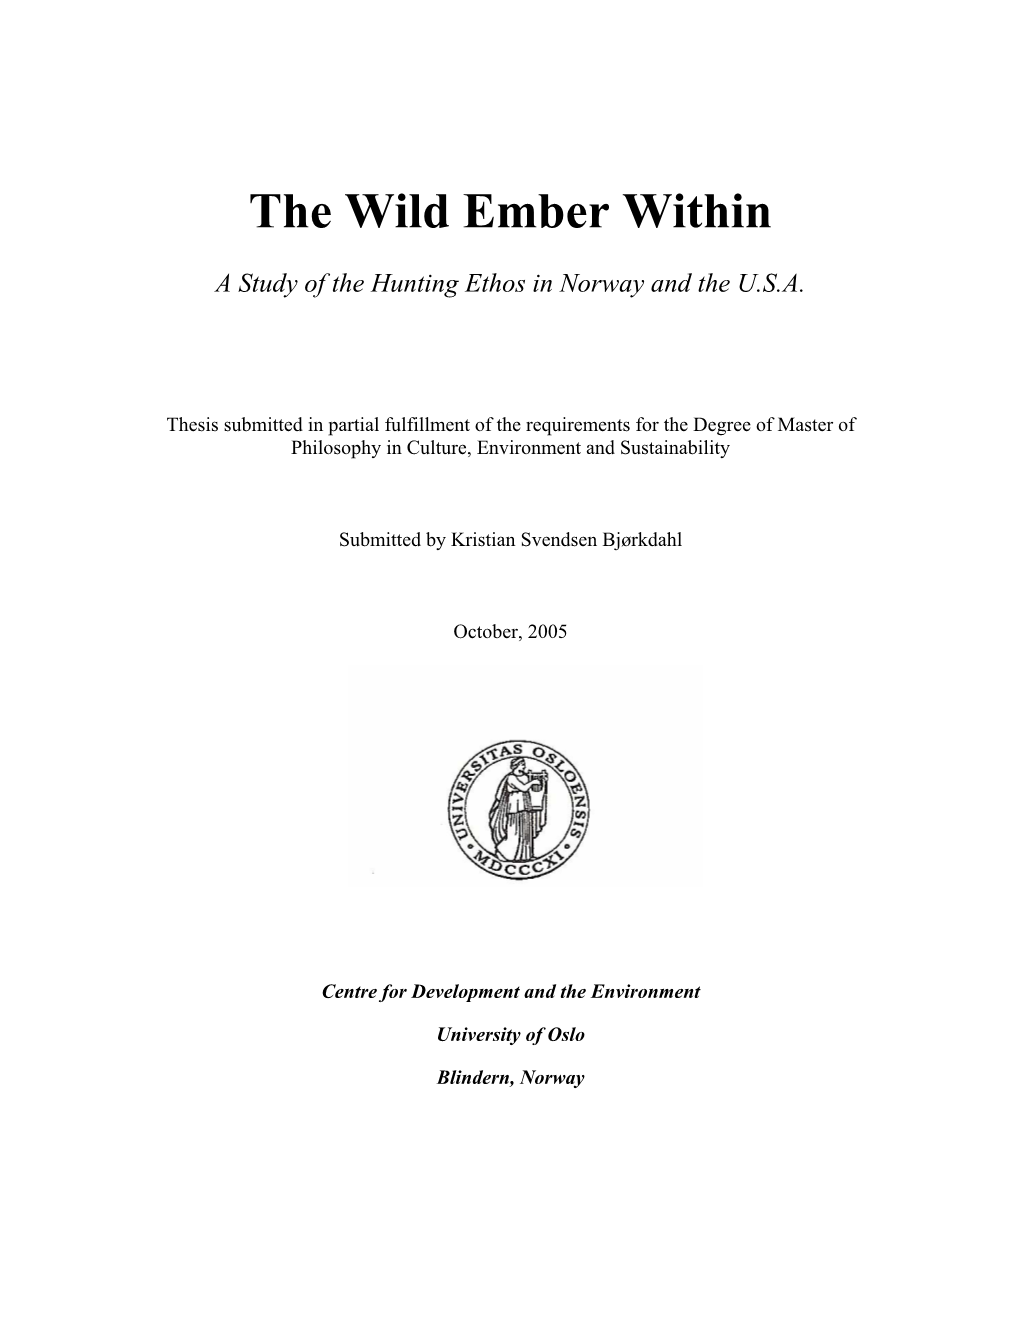 The Wild Ember Within